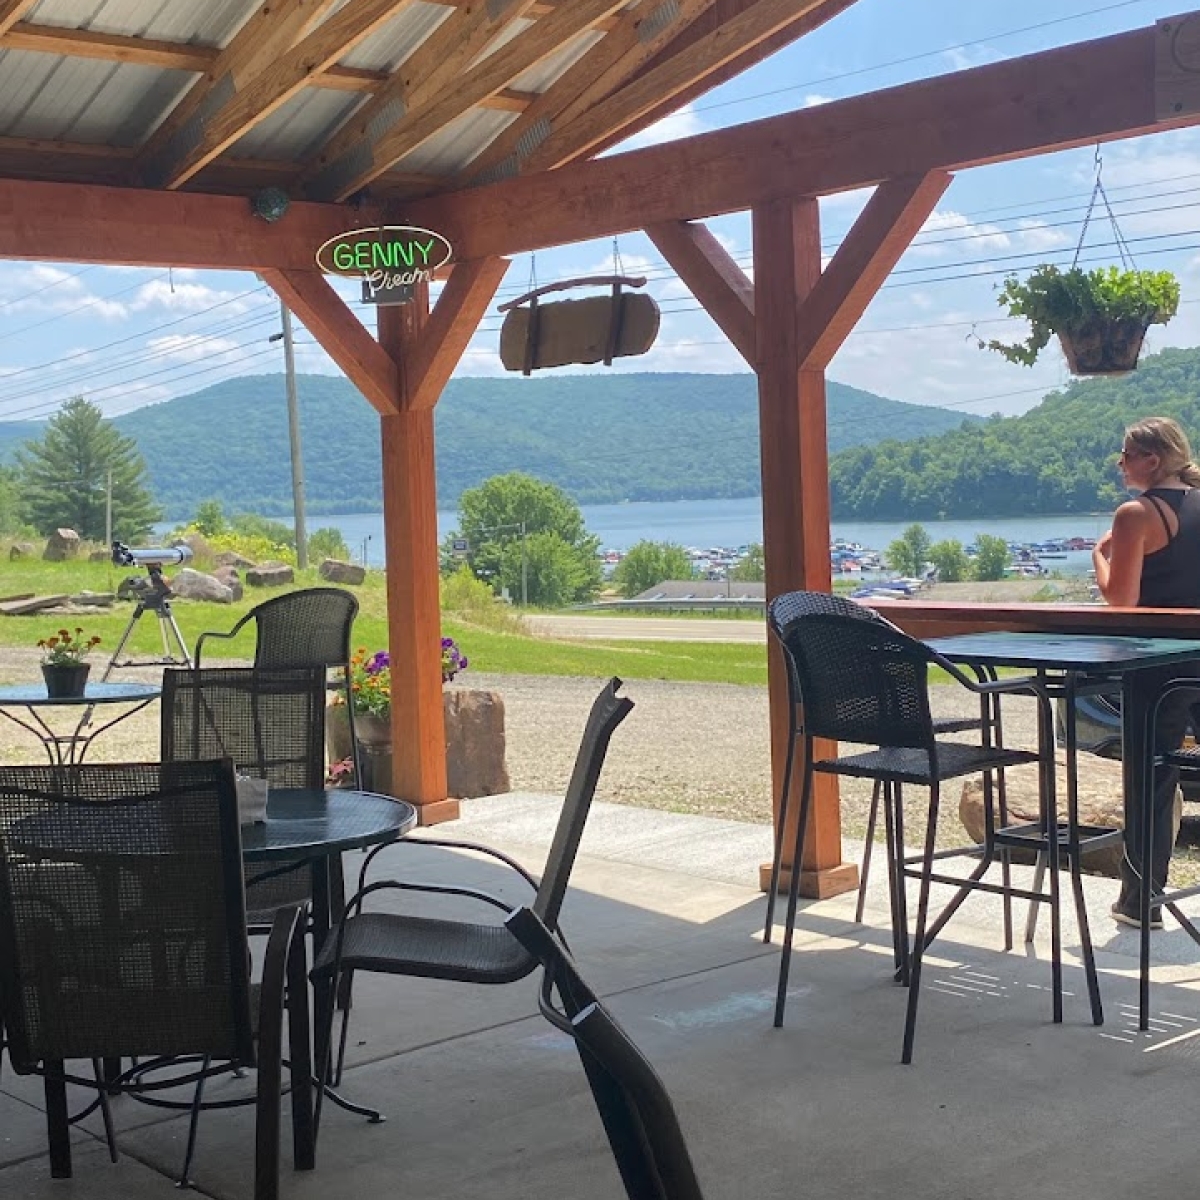 A view from the outdoor dining area at Onoville General Store